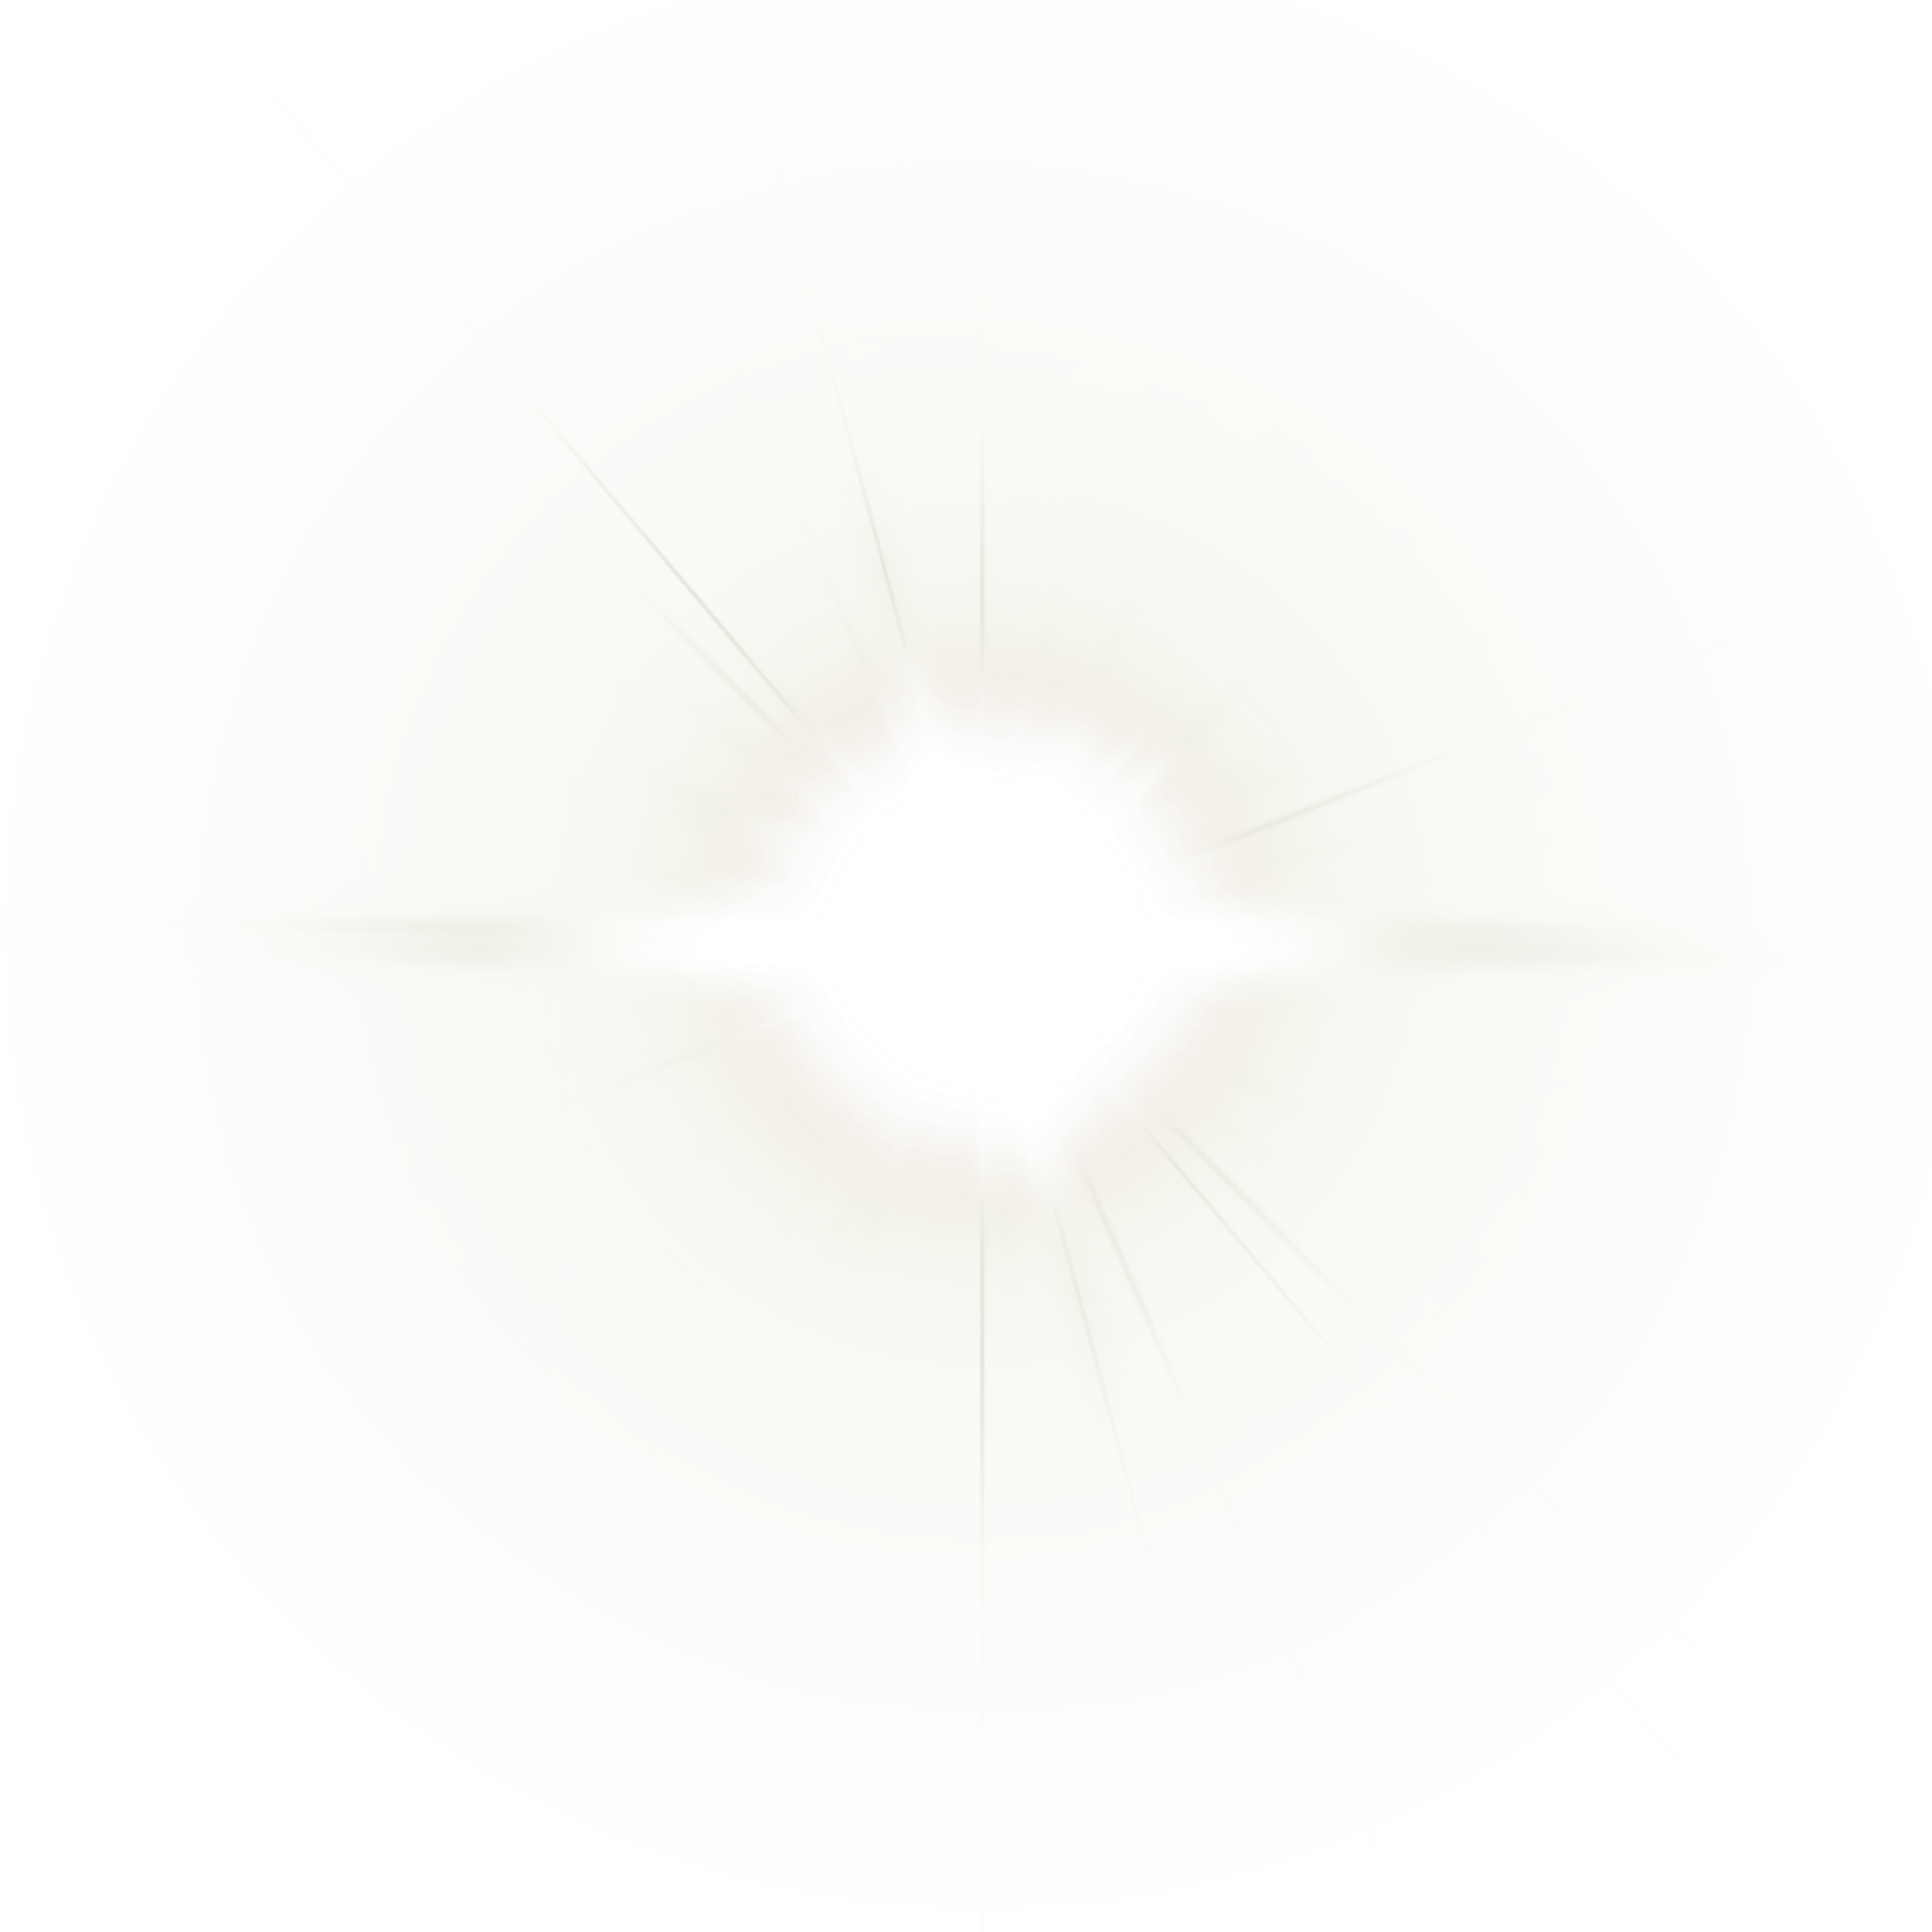 Sun PNG images, real sun PNG free images download.